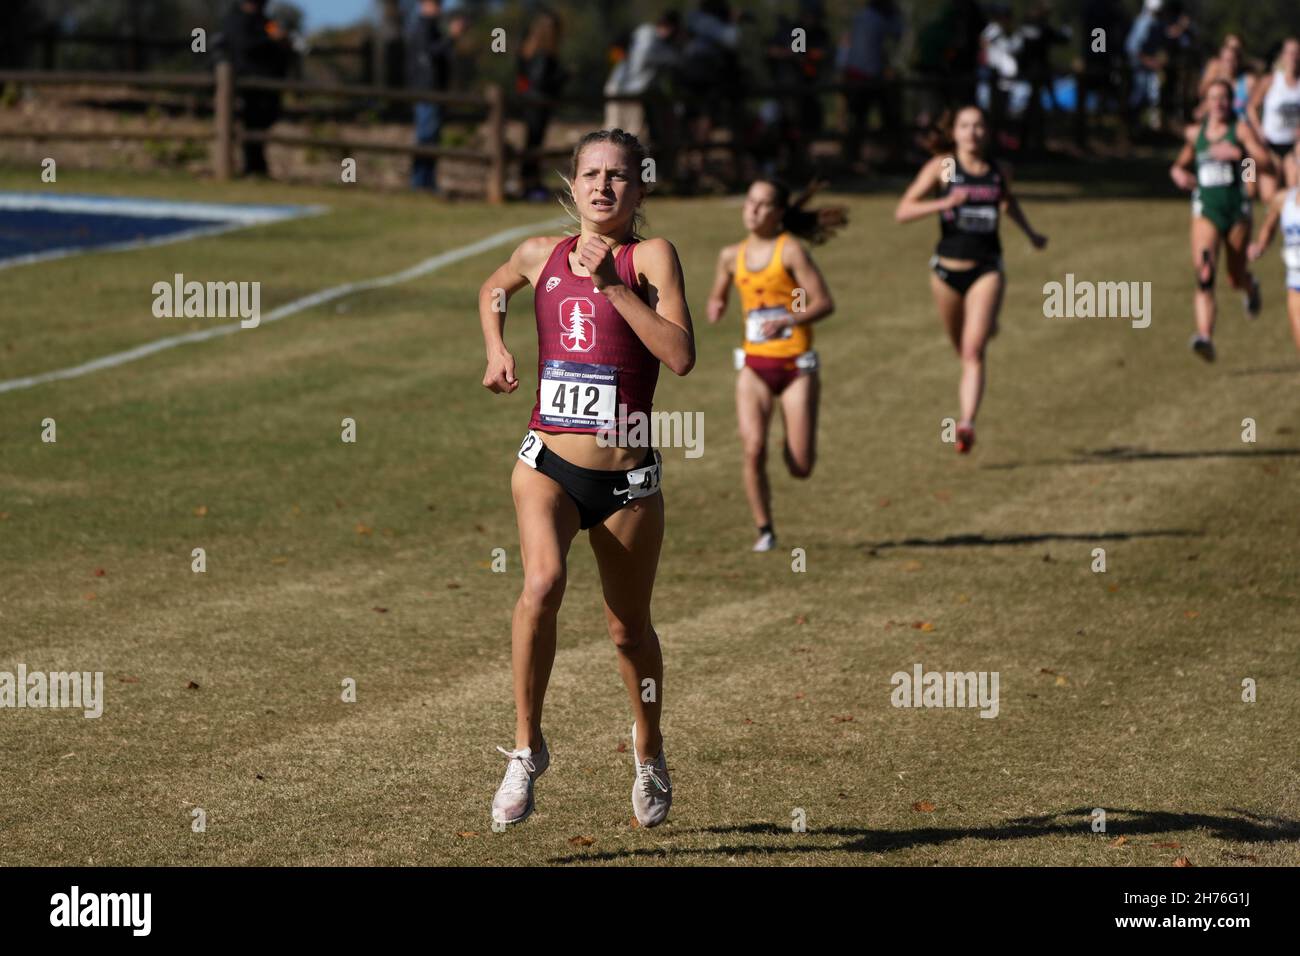 Lucy Jenks of Stanford places 49th in the women's race in 2904.1